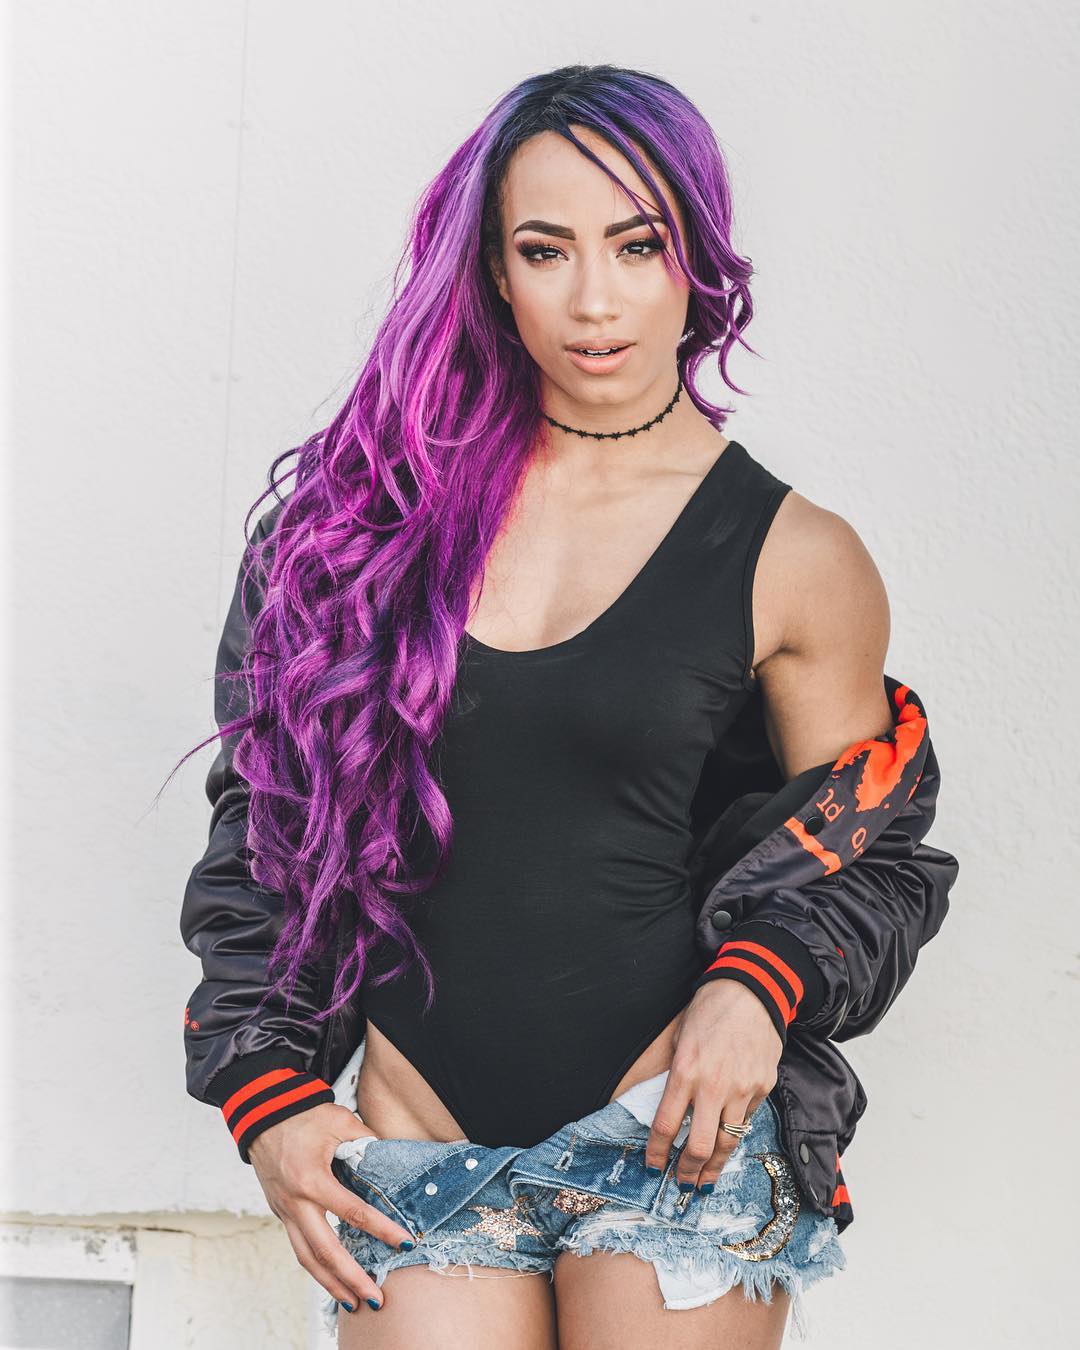 desirea chase recommends sasha banks getting fucked pic